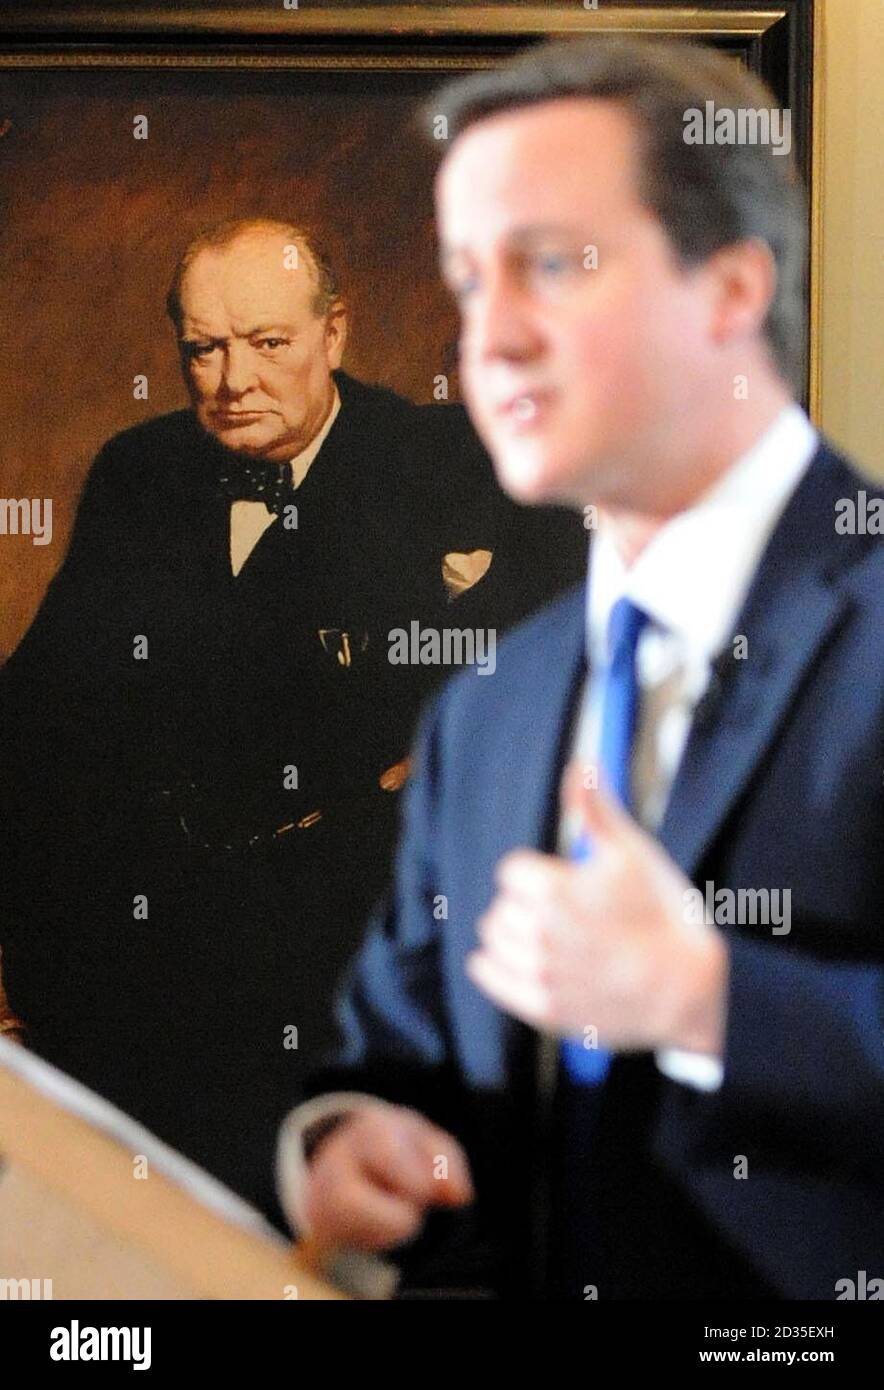 Overlooked by a portrait of wartime Prime Minister Winston Churchill, Conservative Party Leader David Cameron addresses his regular news conference at the St Stephen's Club, Westminster. Stock Photo